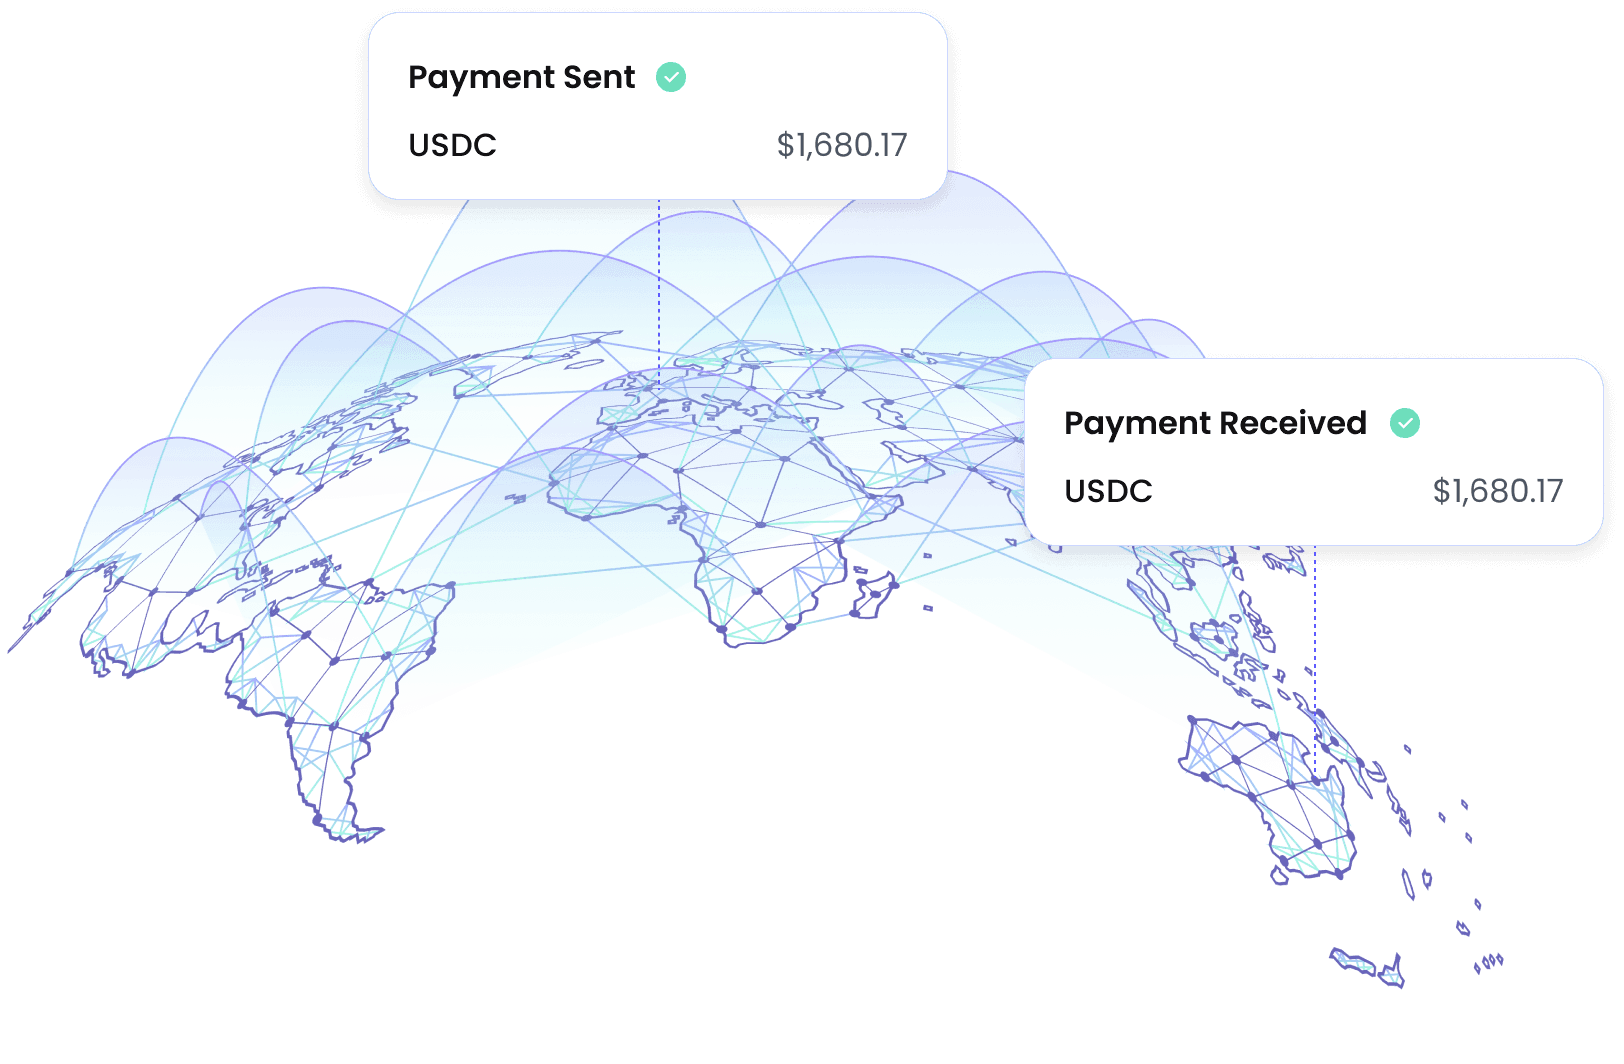 Global payments